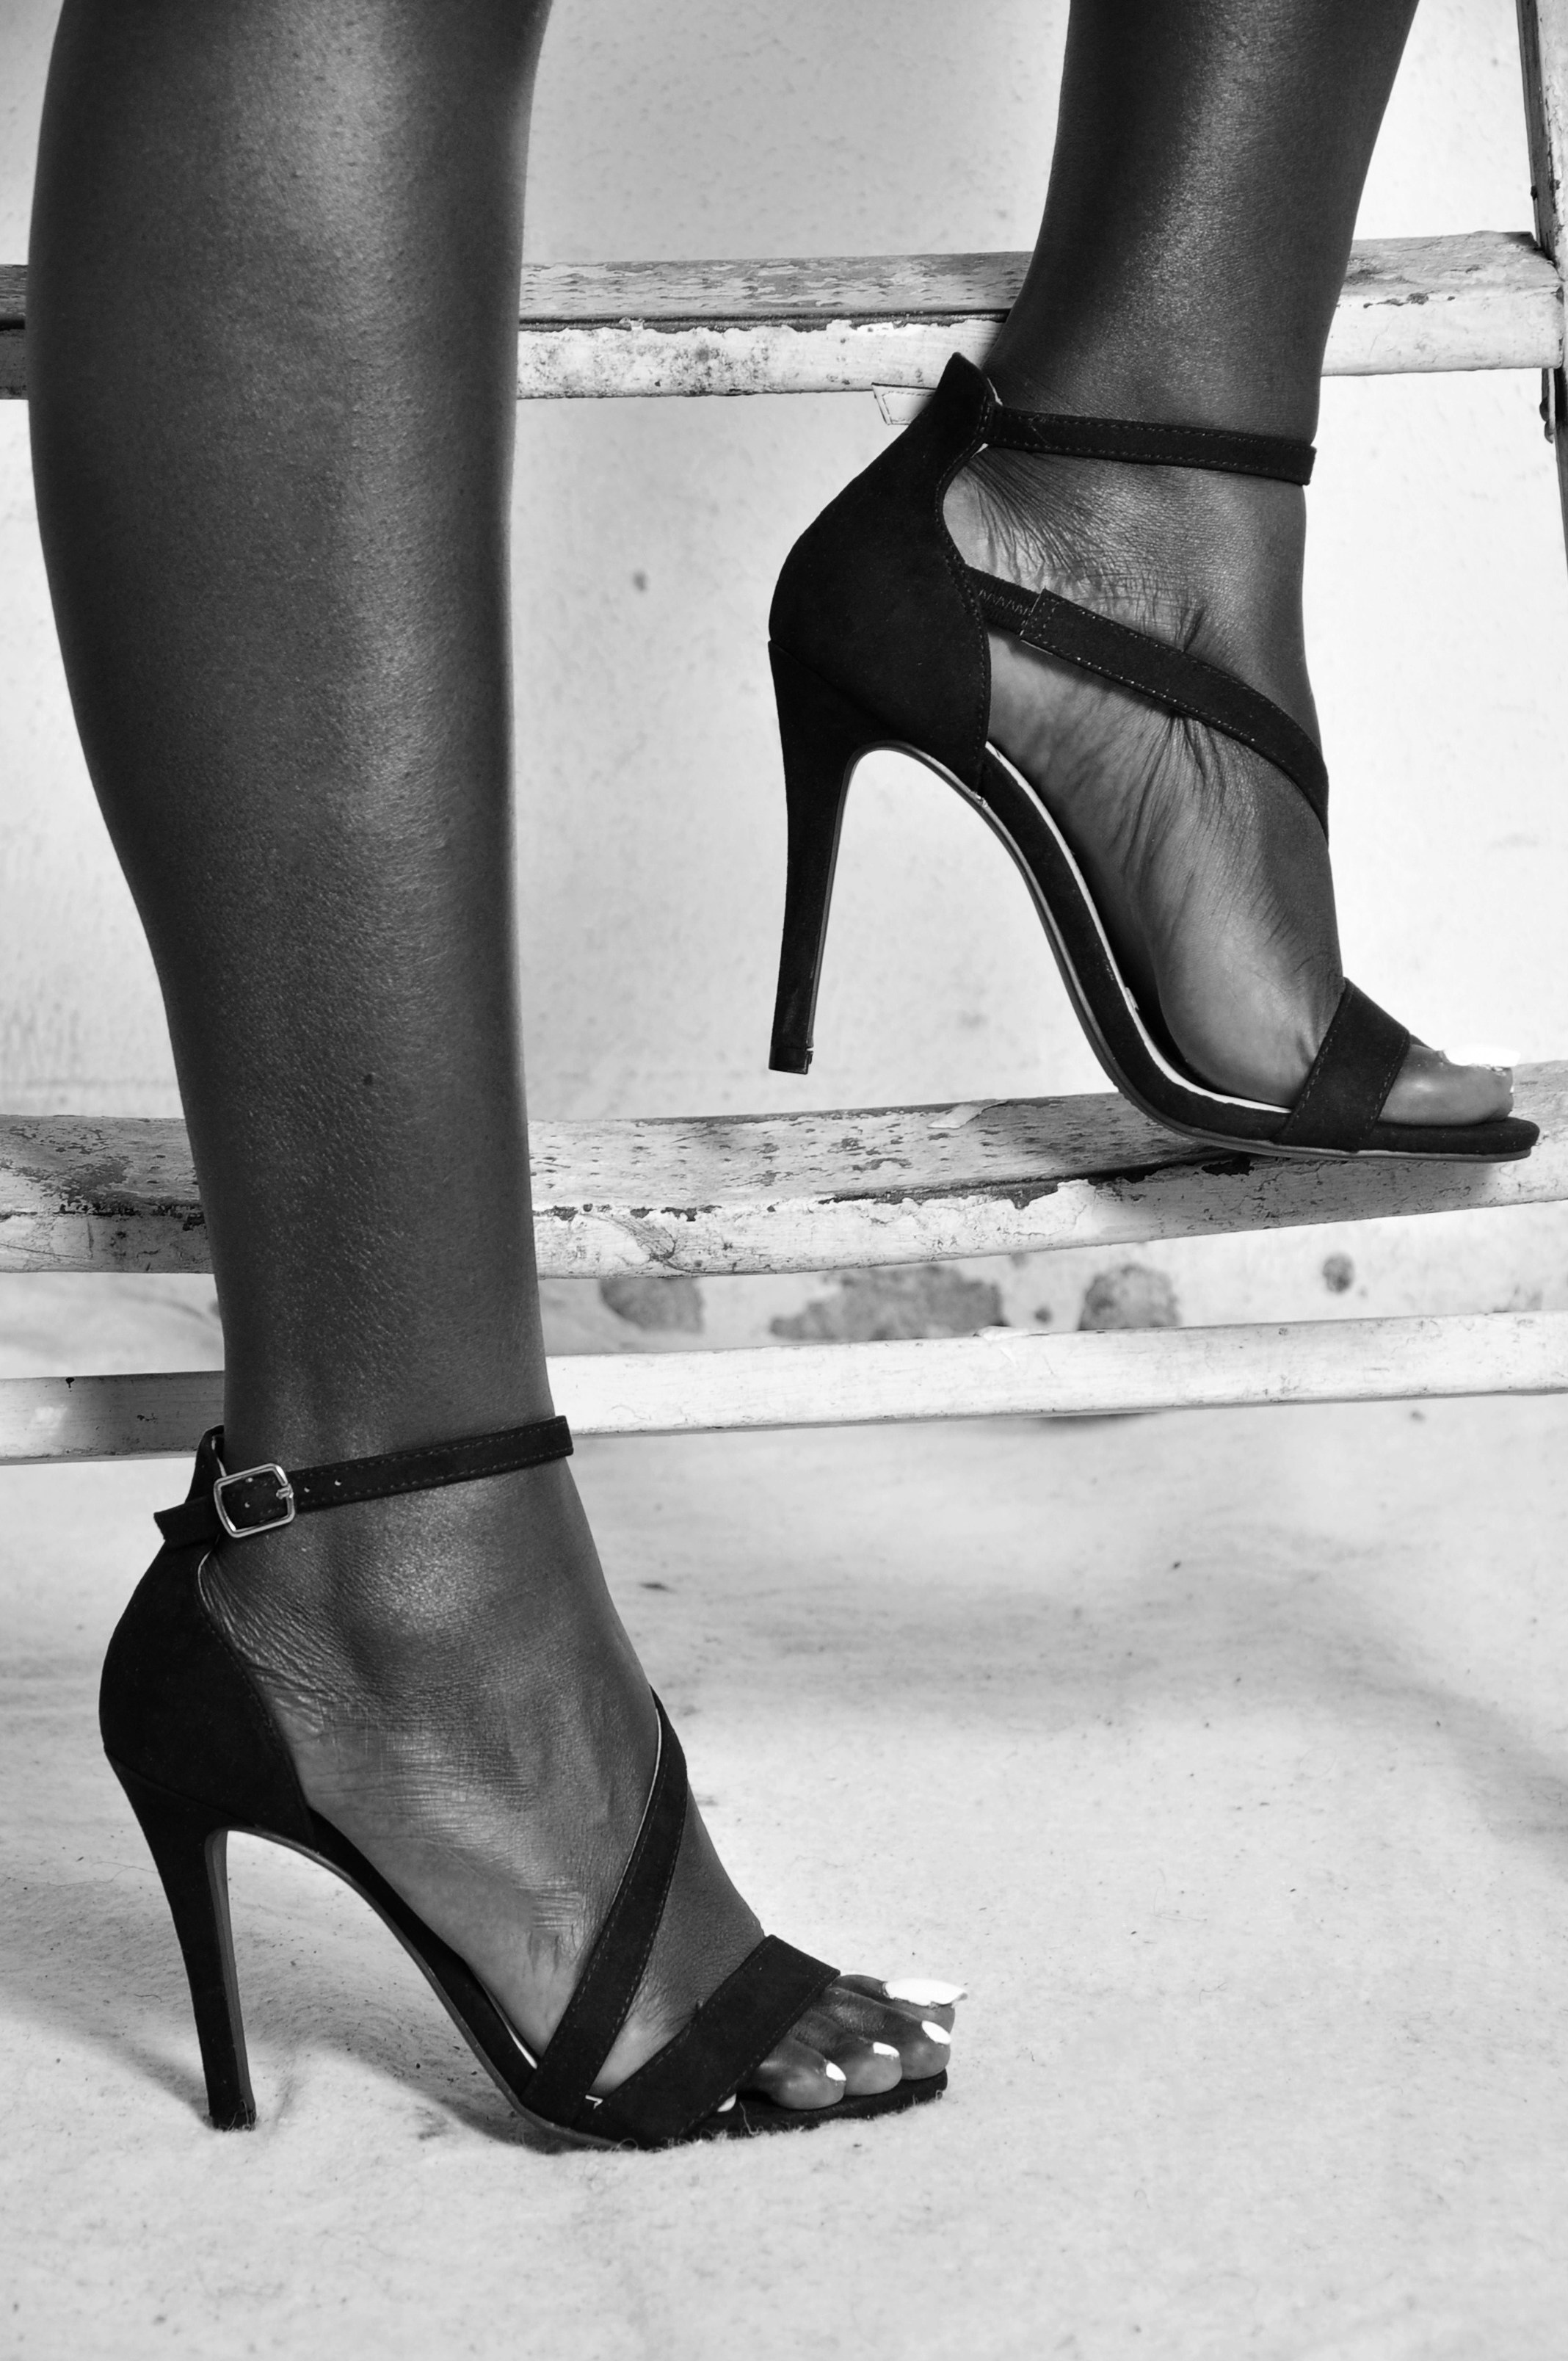 A person wearing heels and standing on the stairs | Source: Unsplash